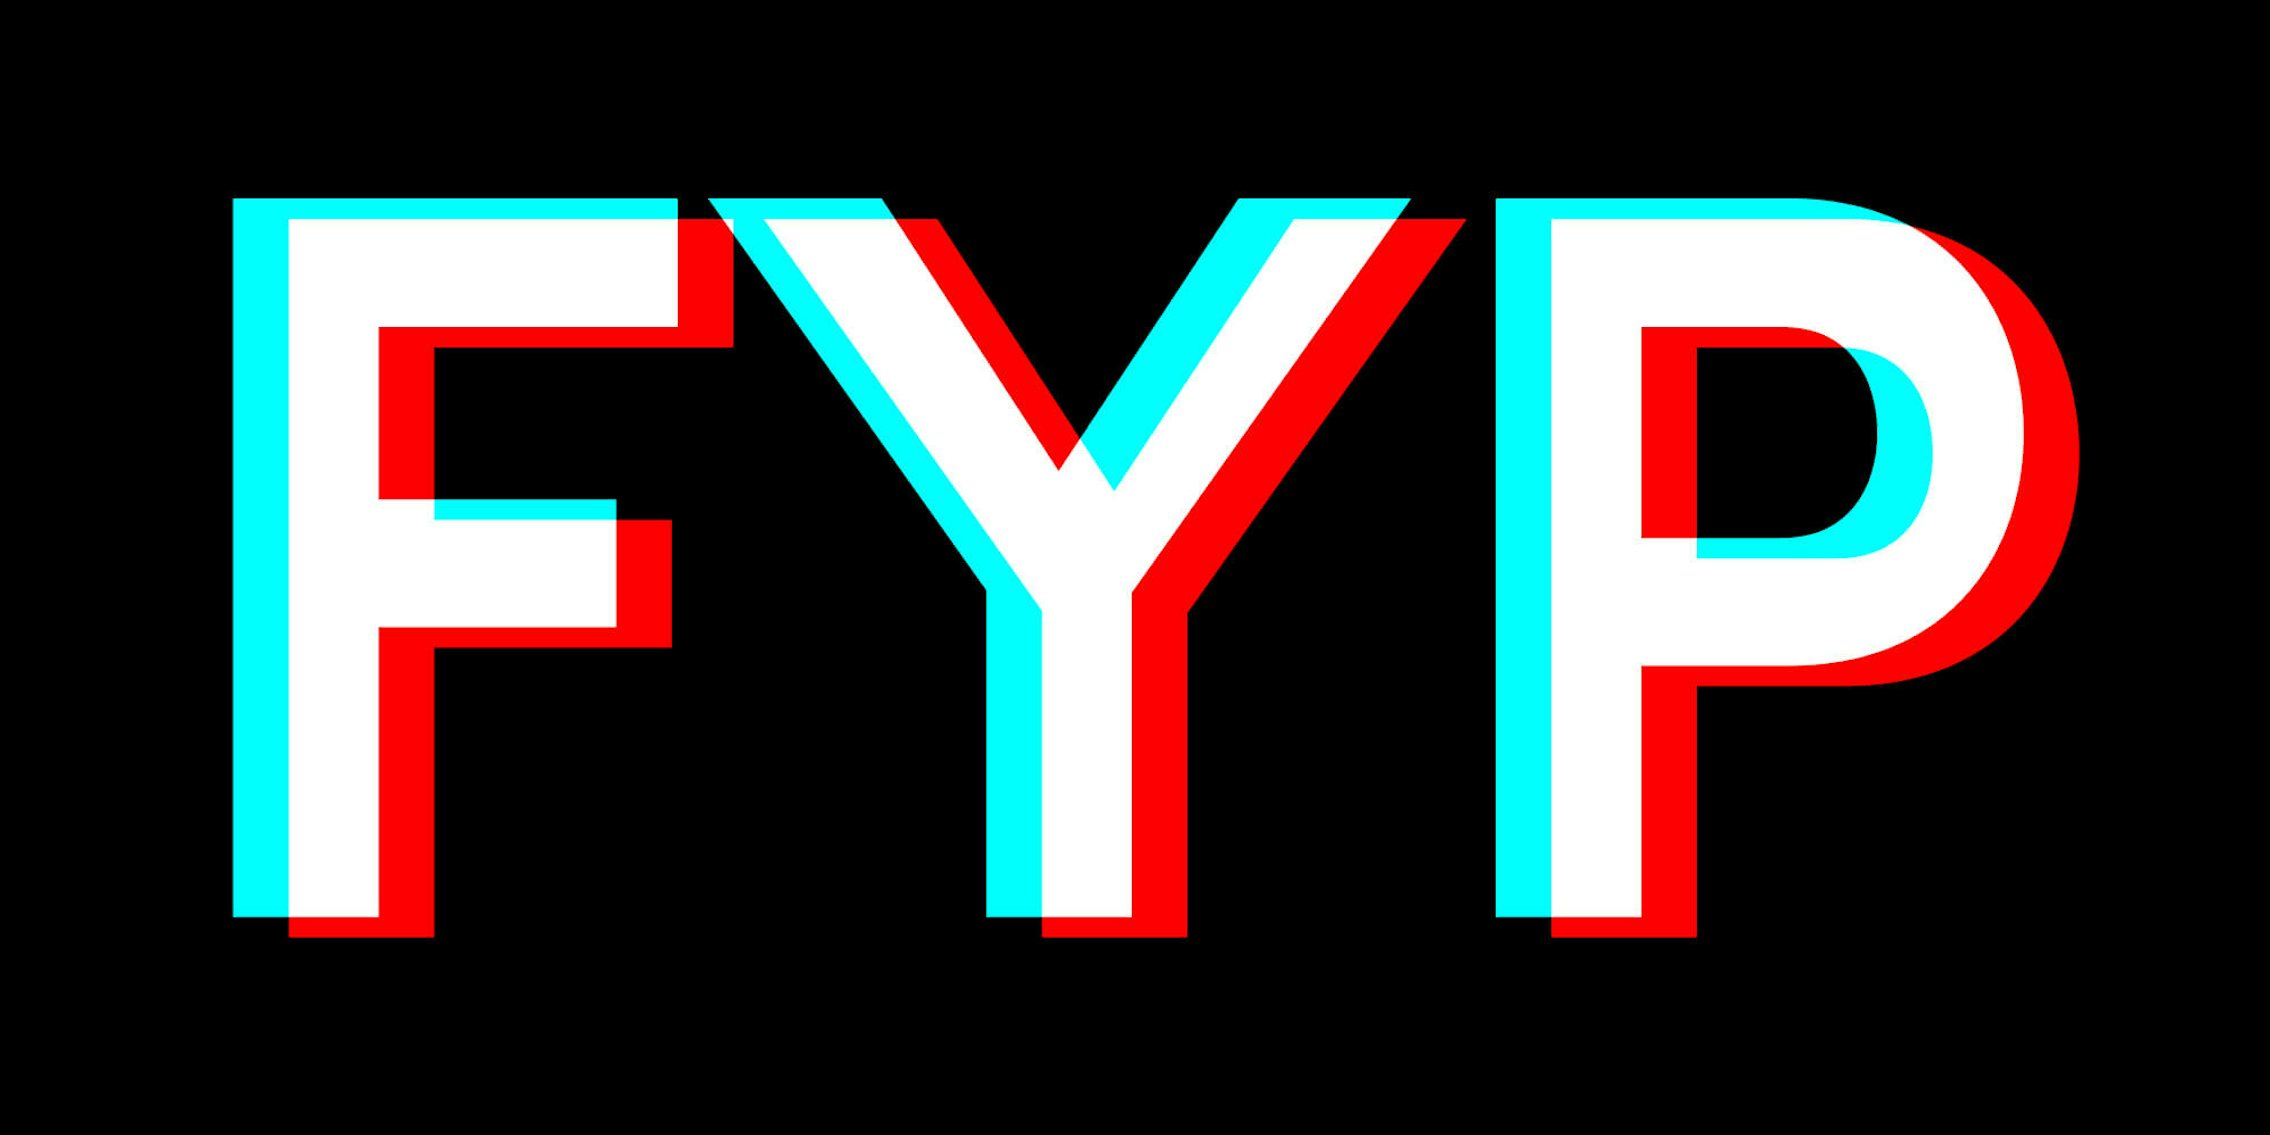 What does FYP mean? Here's everything you need to know